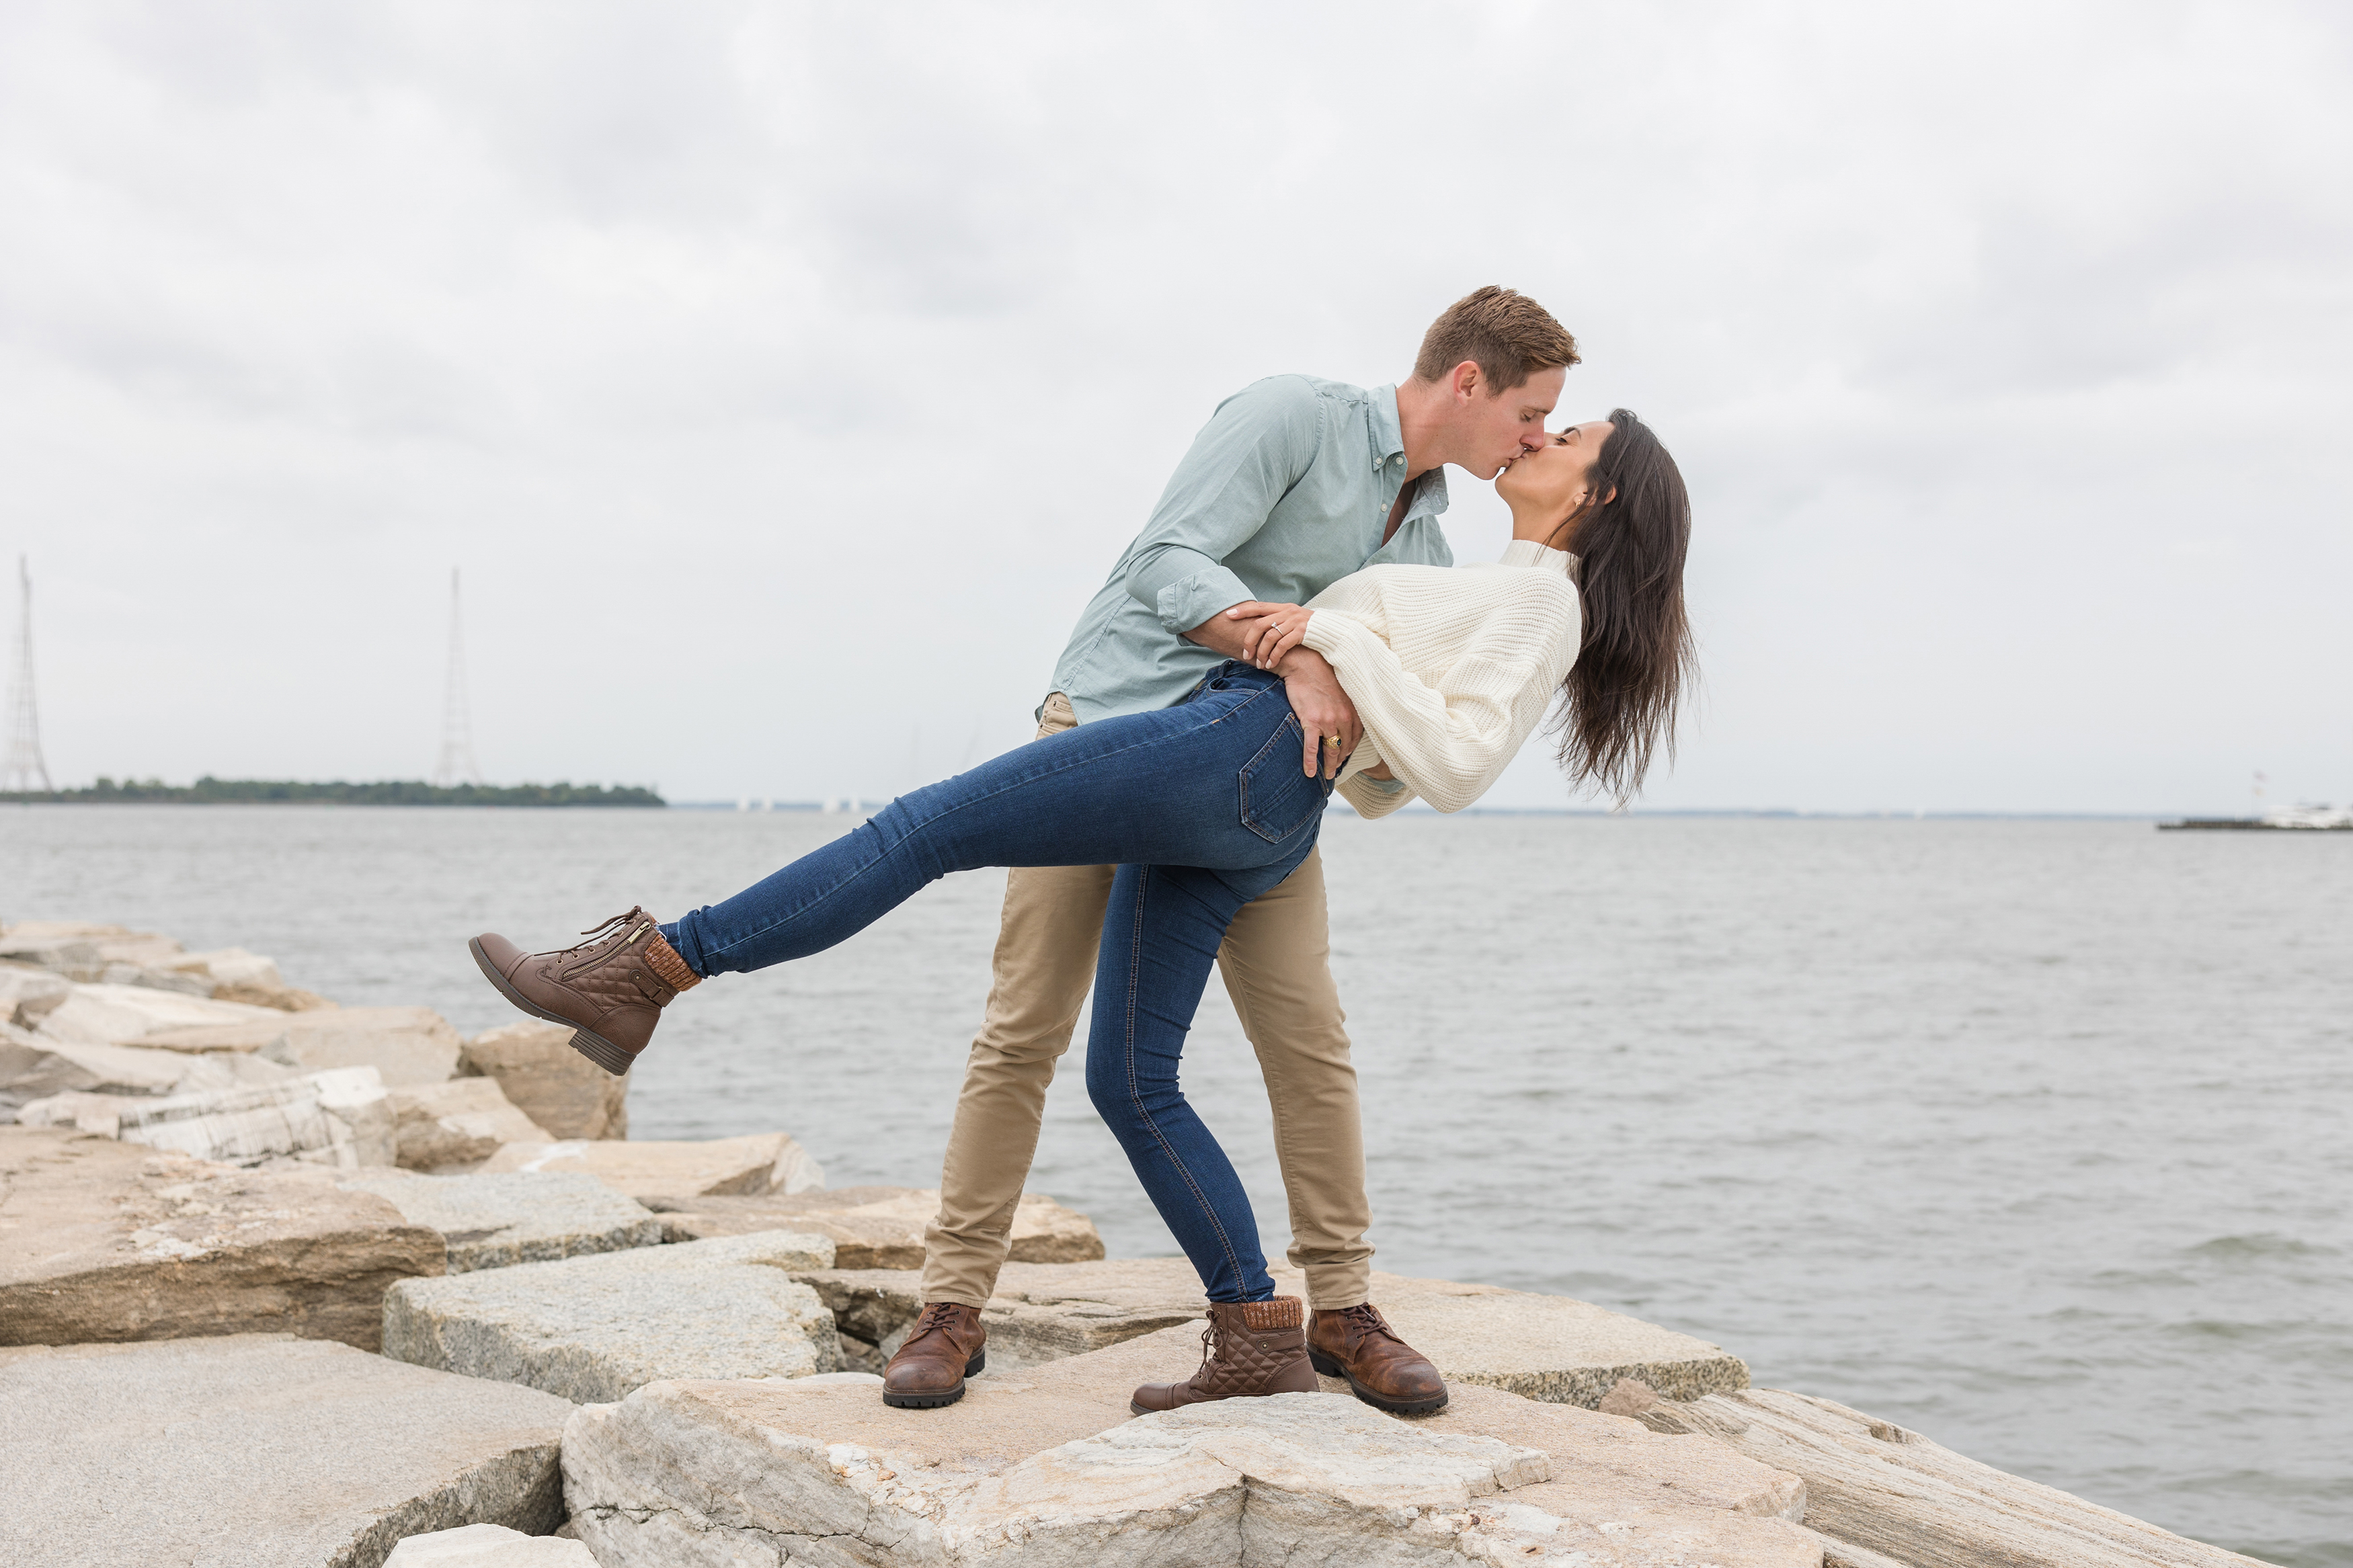 Naval Academy Downtown Annapolis Engagement Session by Christa Rae Photography